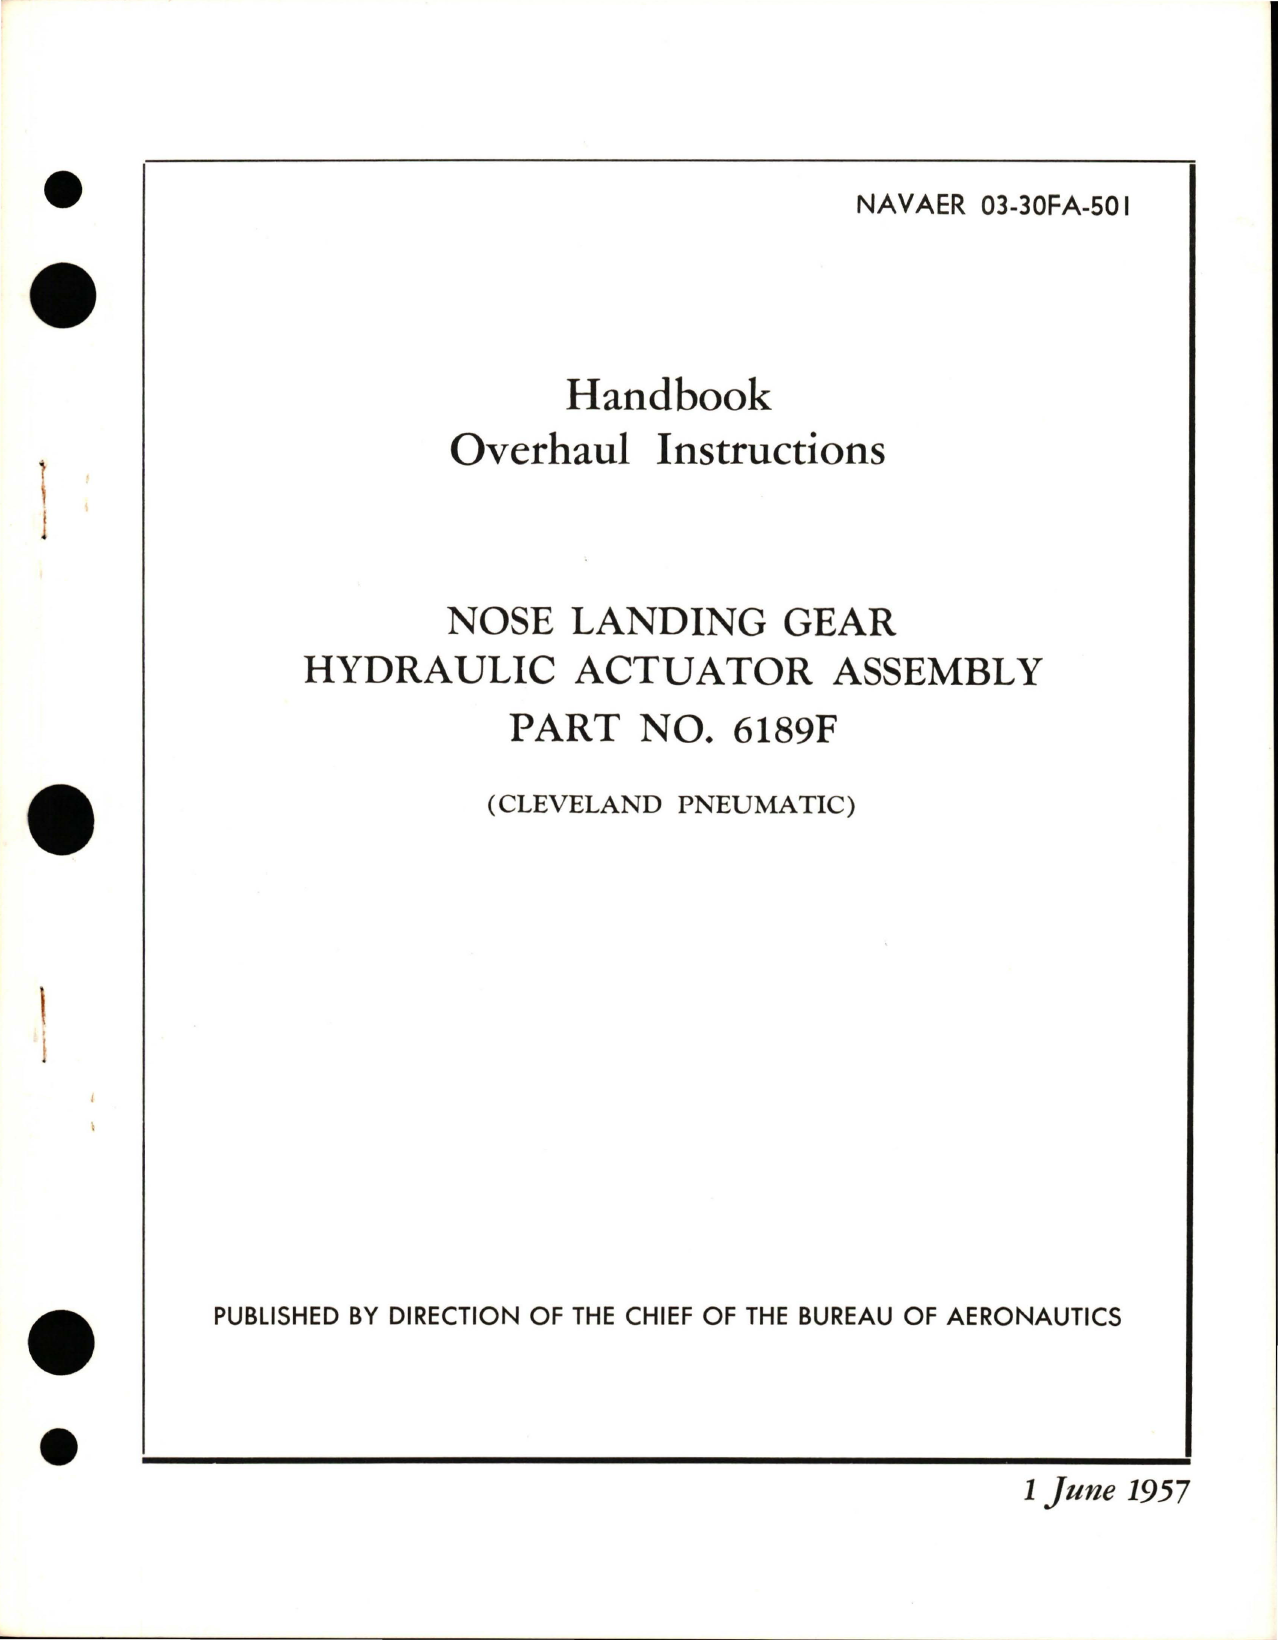 Sample page 1 from AirCorps Library document: Overhaul Instructions for Nose Landing Gear Hydraulic Actuator Assembly - Part 6189F